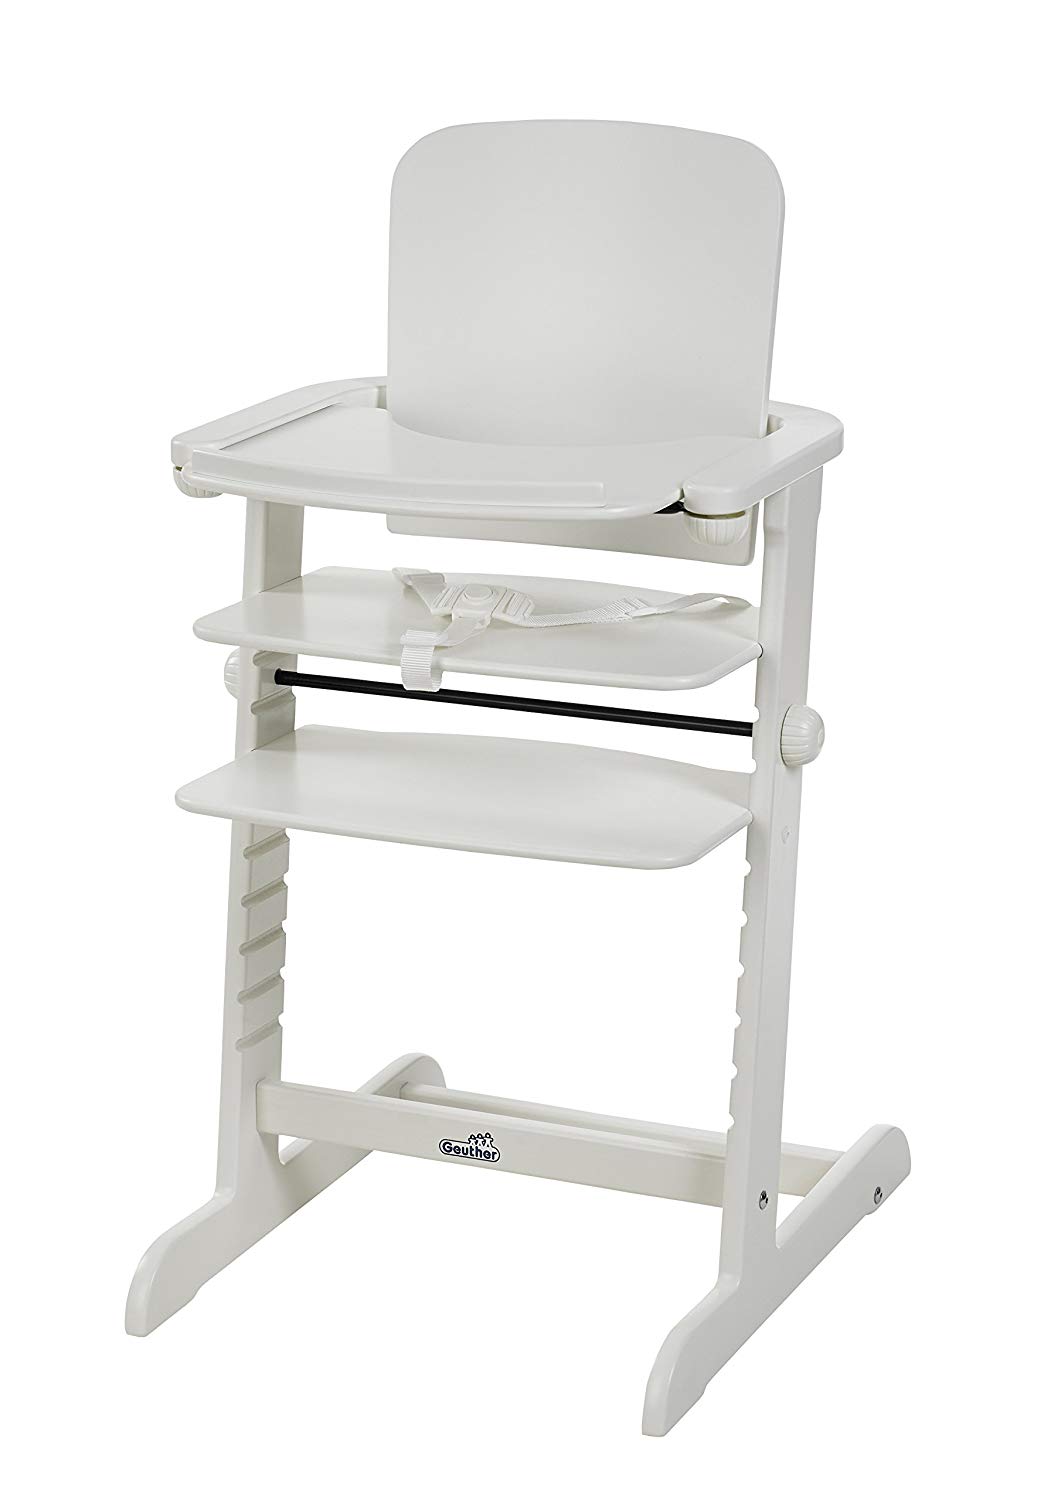 Geuther High Chair/Grows Family White White